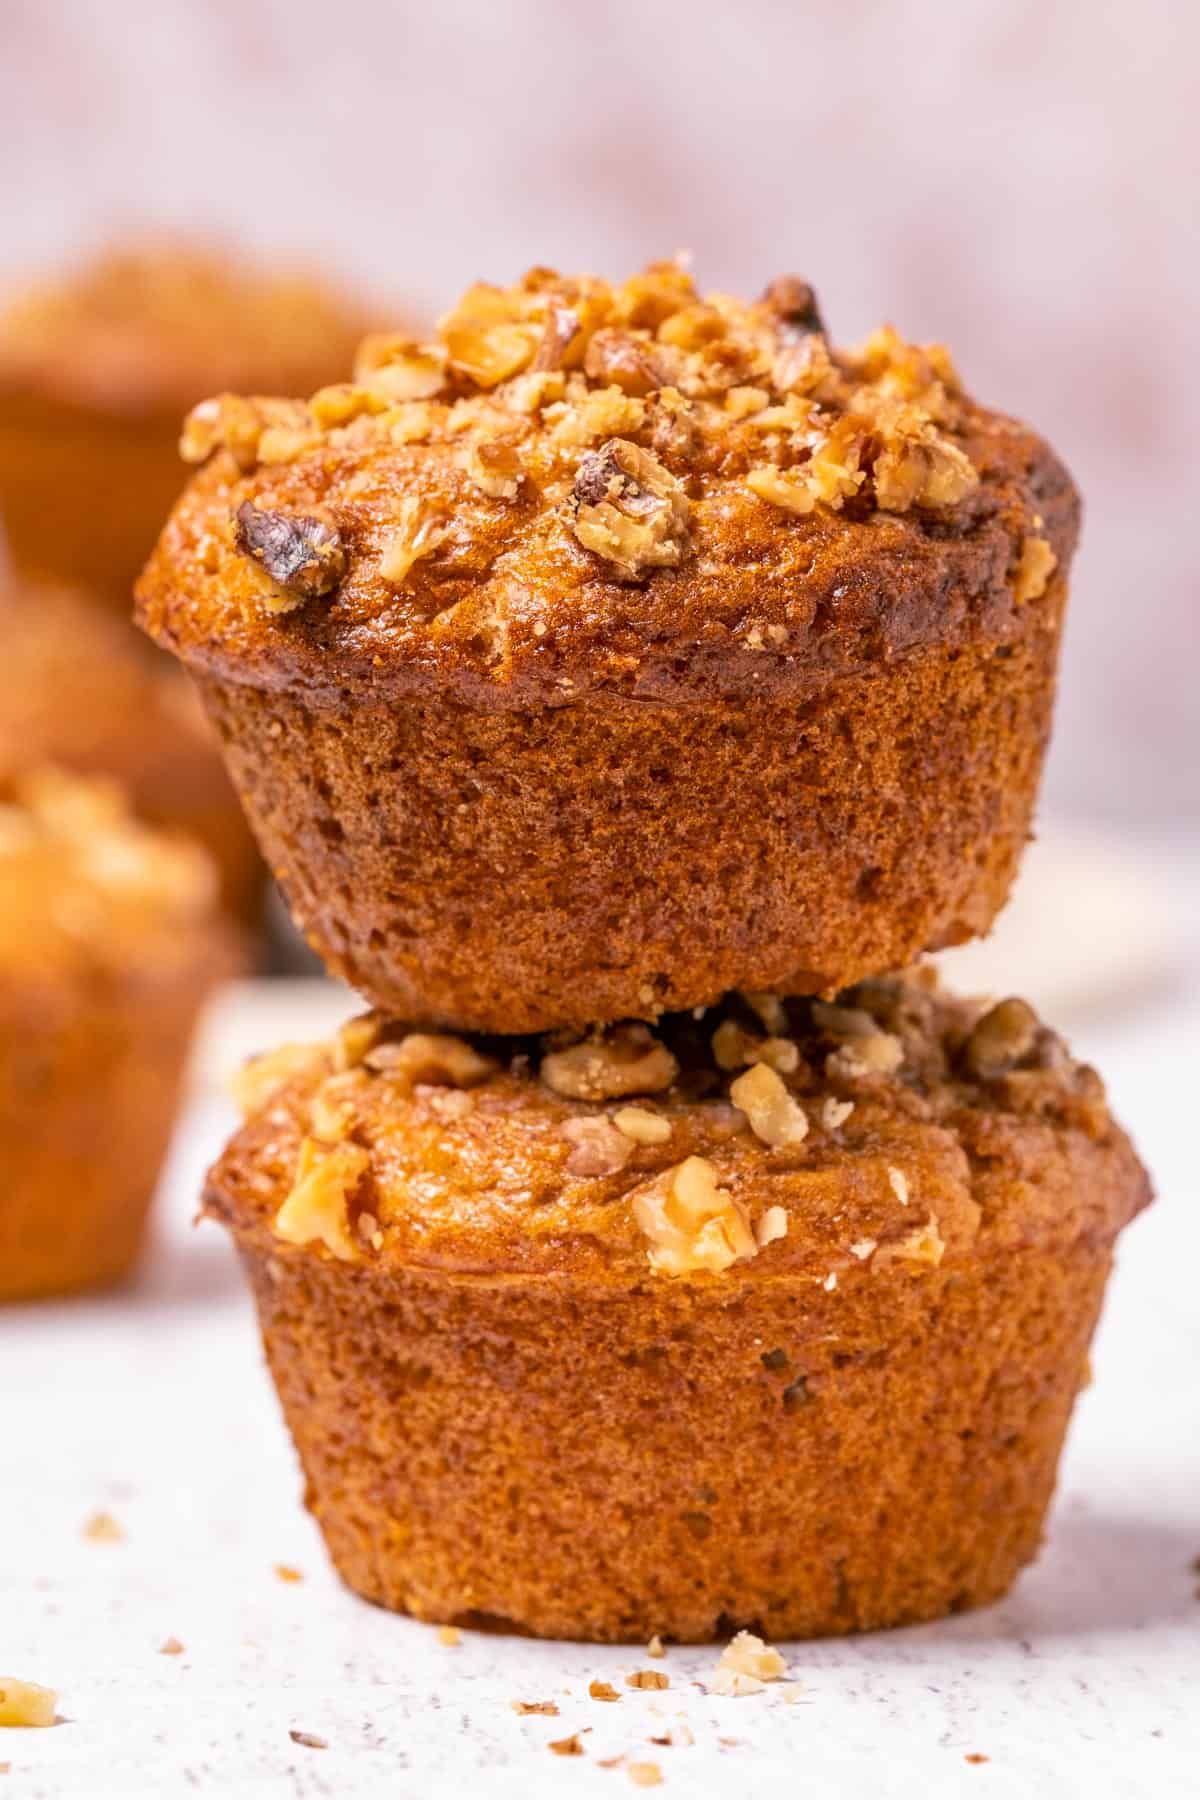 Stack of two banana bread muffins.